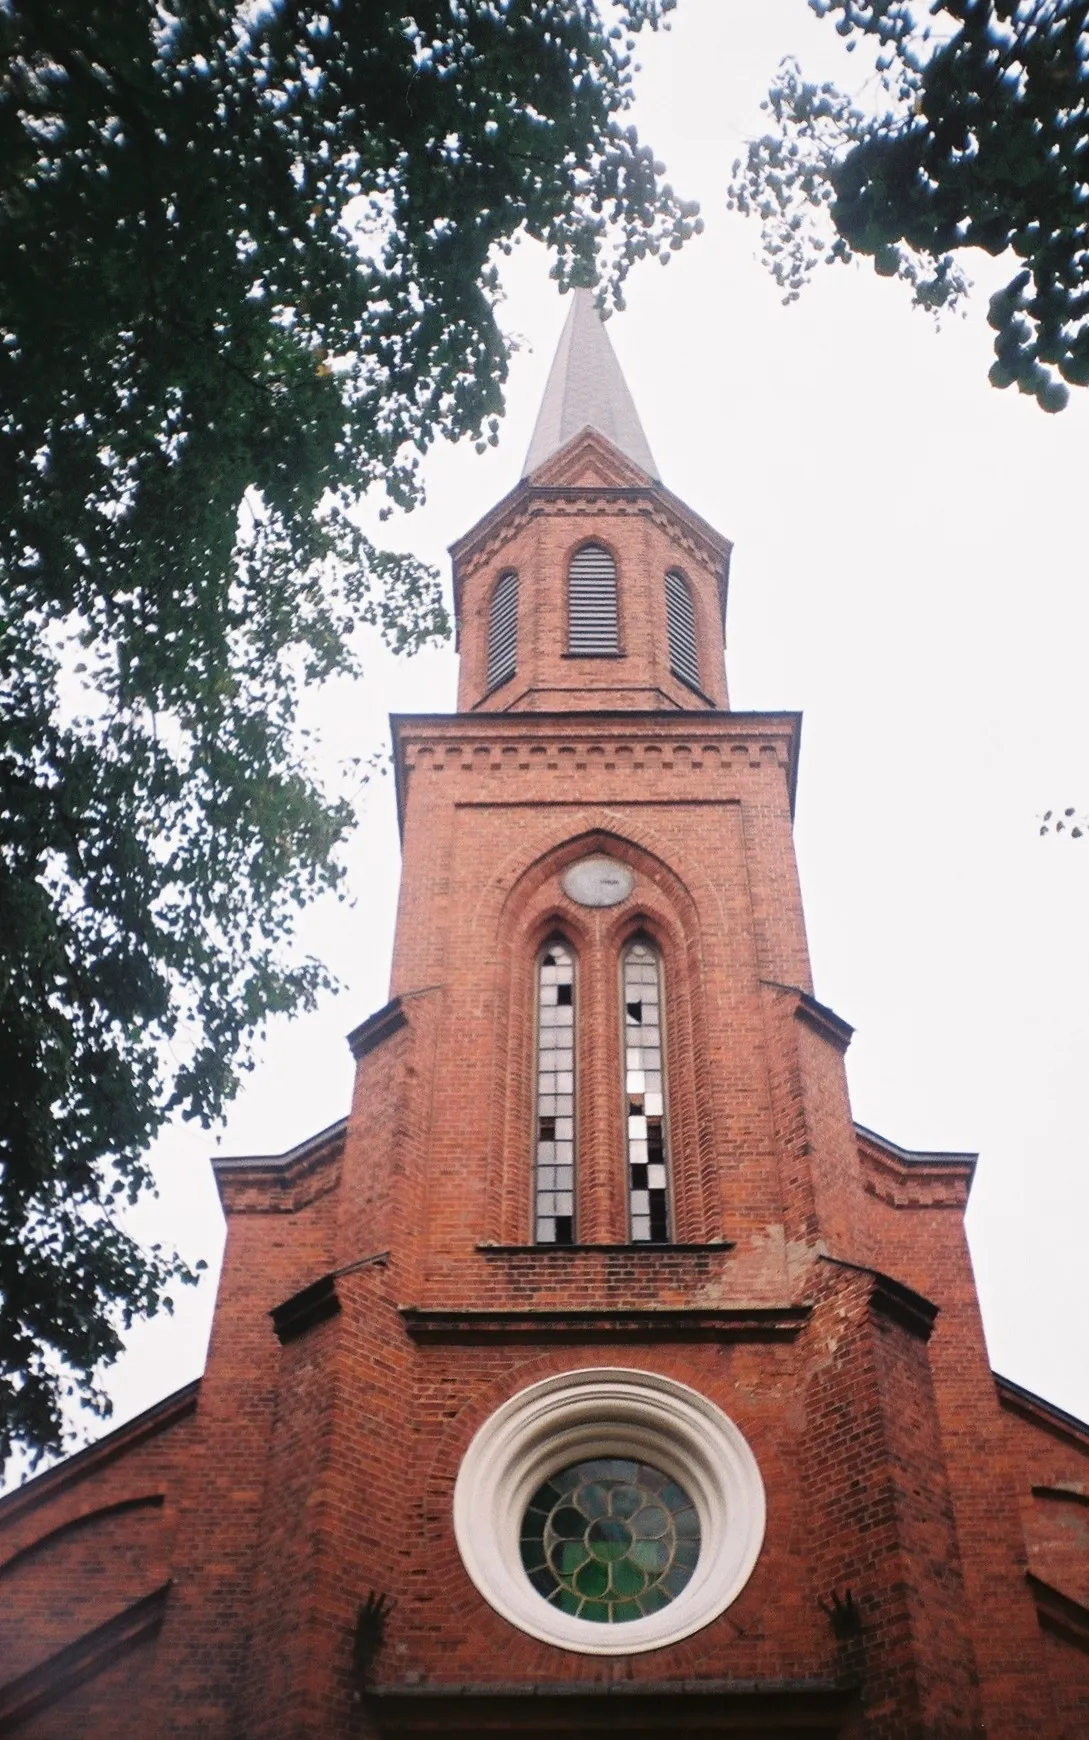 Photo showing: Front view of the parish church tower in Miedzna, Poland